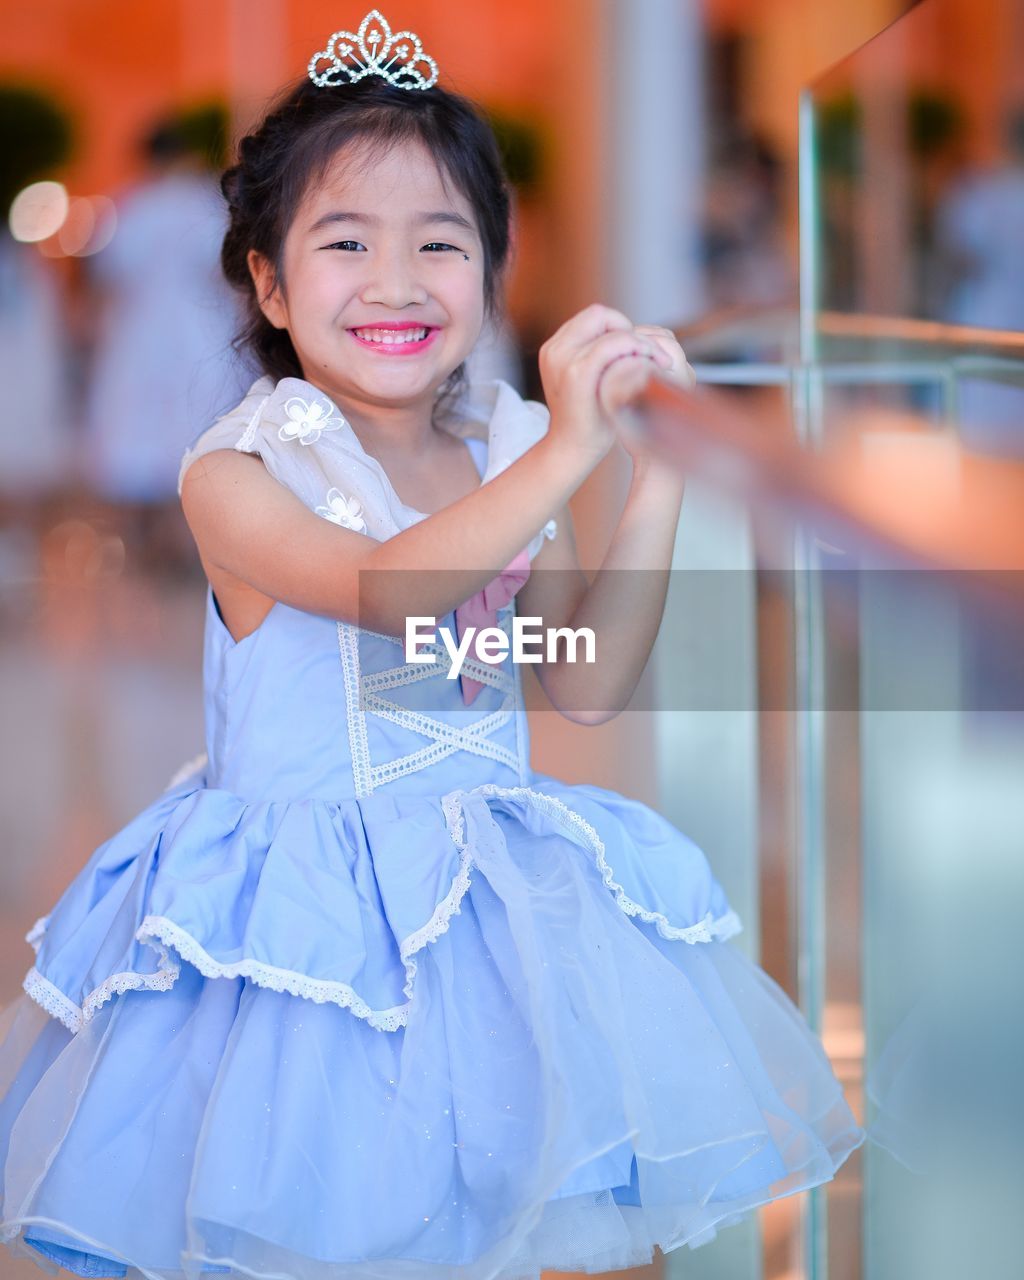 EyeEm Selects Fashion Smiling Looking At Camera Portrait Beauty Arts Culture And Entertainment Girls One Person Child Beautiful People Happiness Outdoors People Cheerful Blue City Children Only Glamour Adult Day